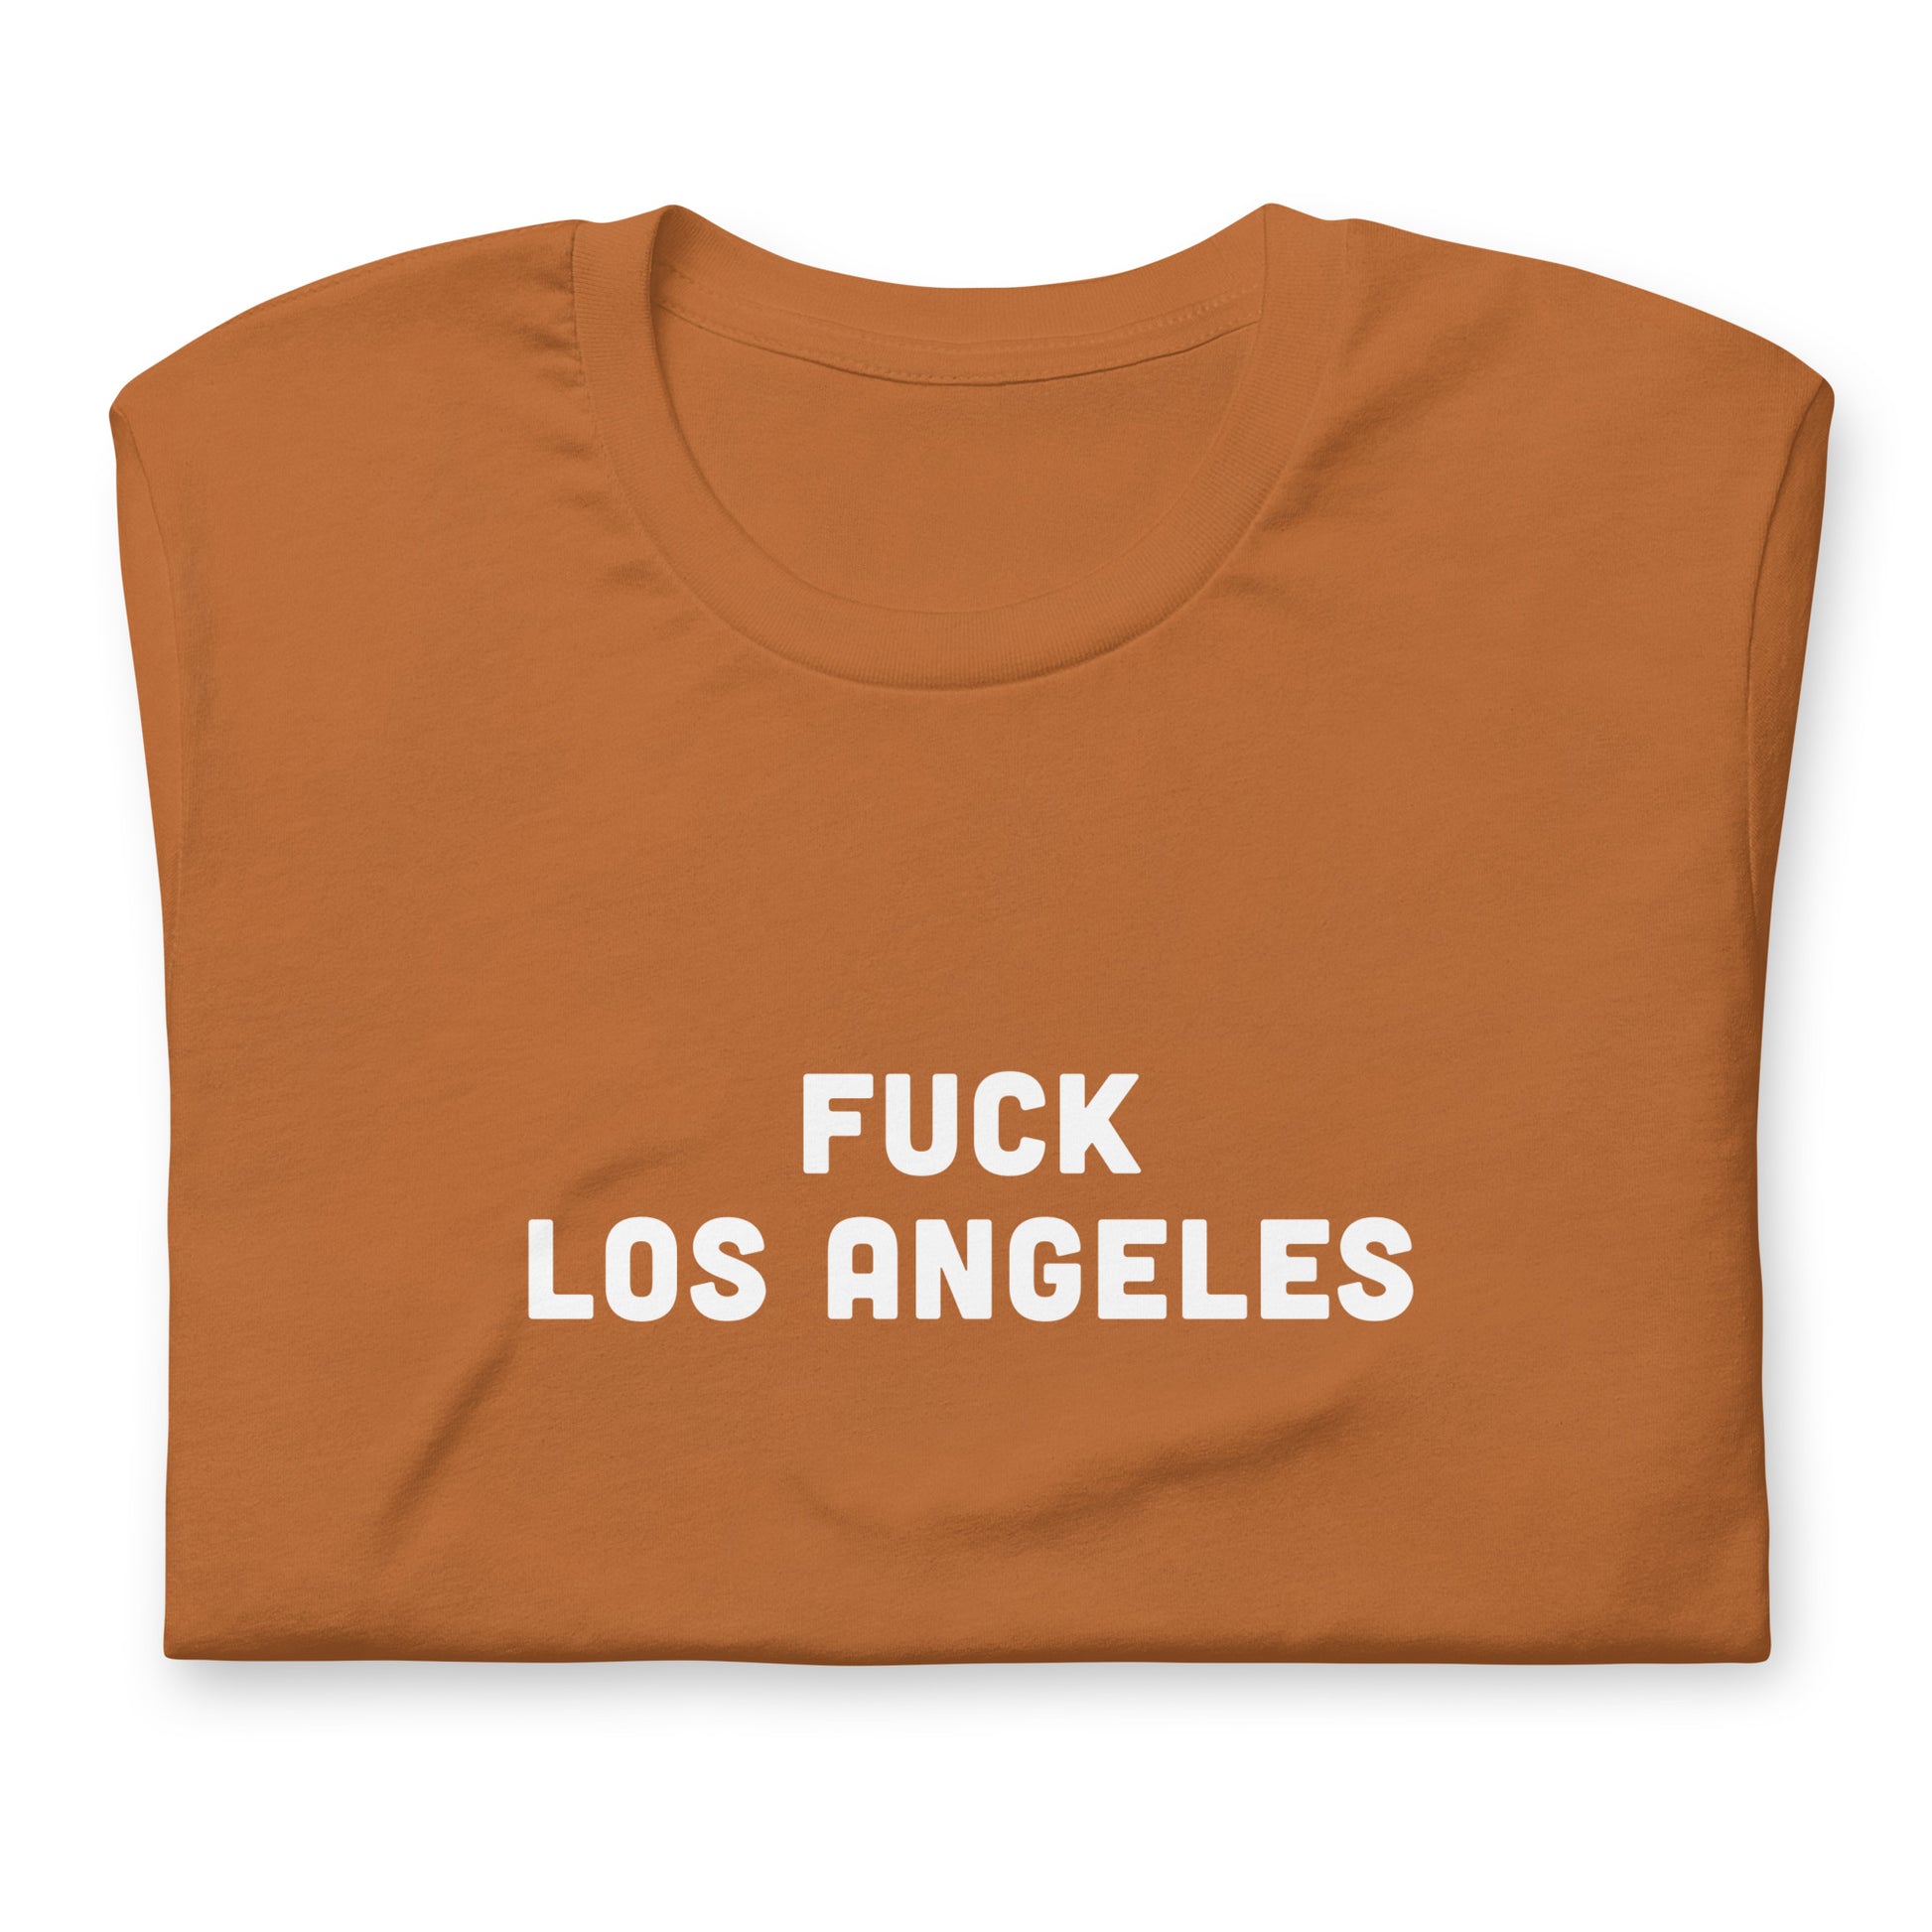 Fuck Los Angeles T-Shirt Size XL Color Navy